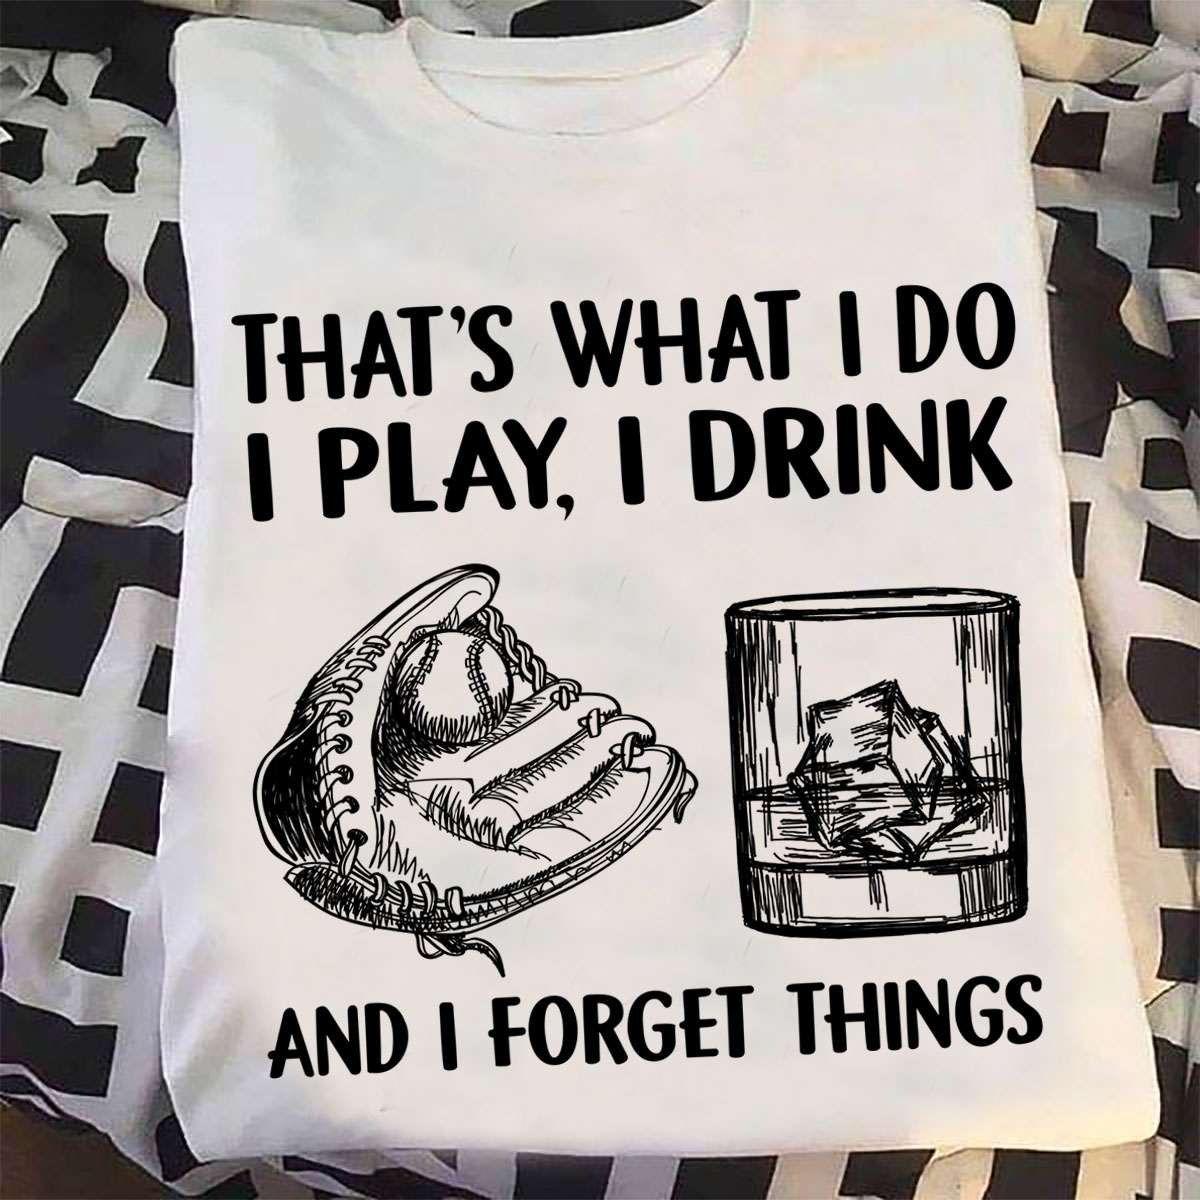 That's what I do I play, I drink and I forget things - Baseball and wine, playing and drinking